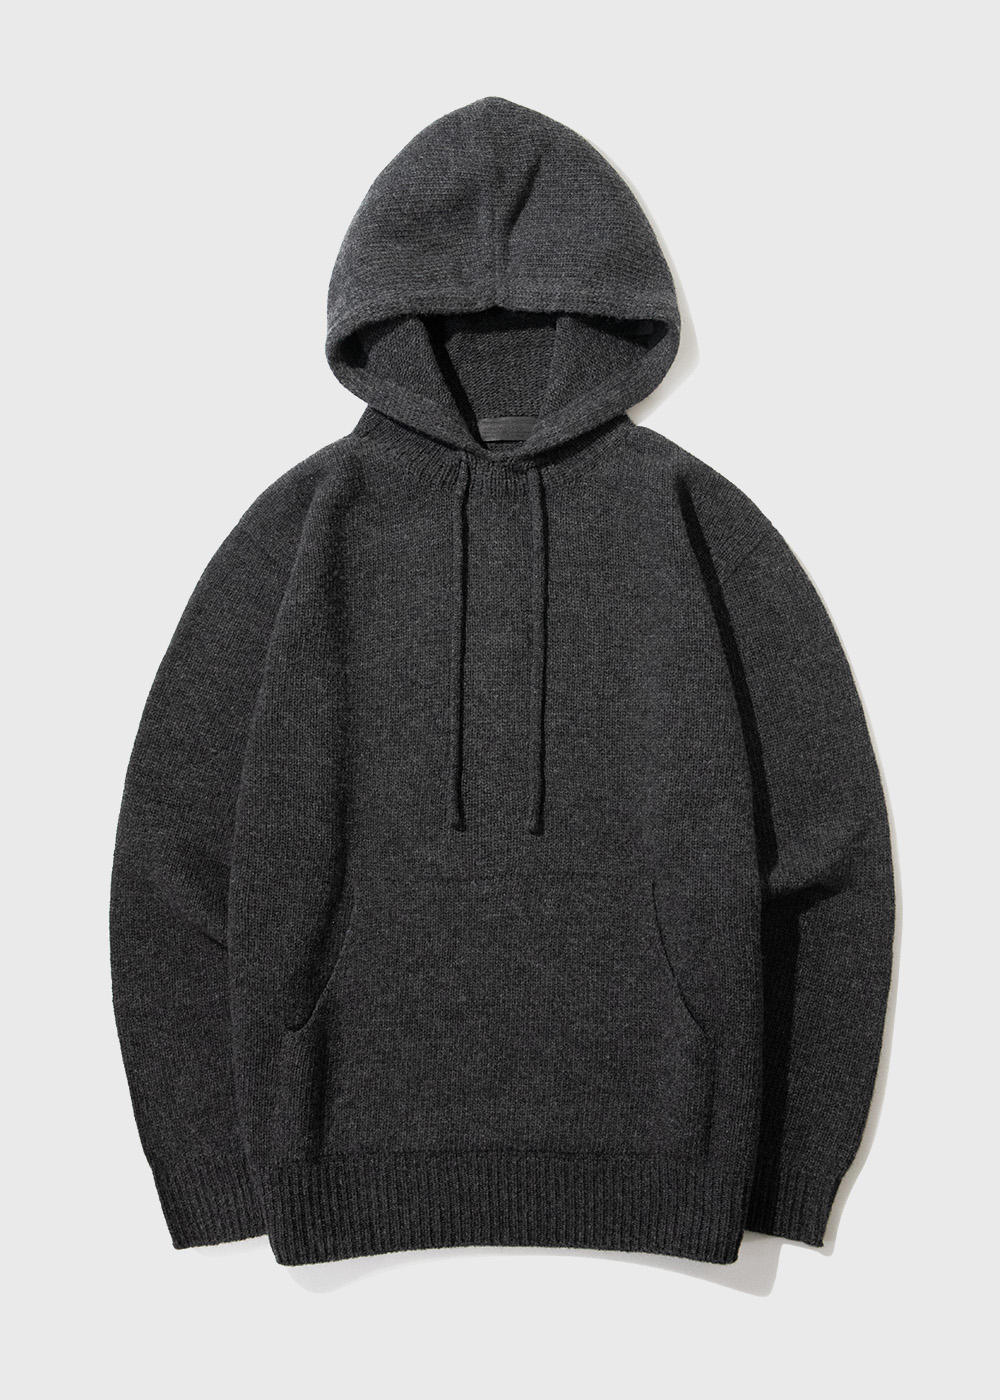 Whole Garment Hoodie Knit _ charcoal